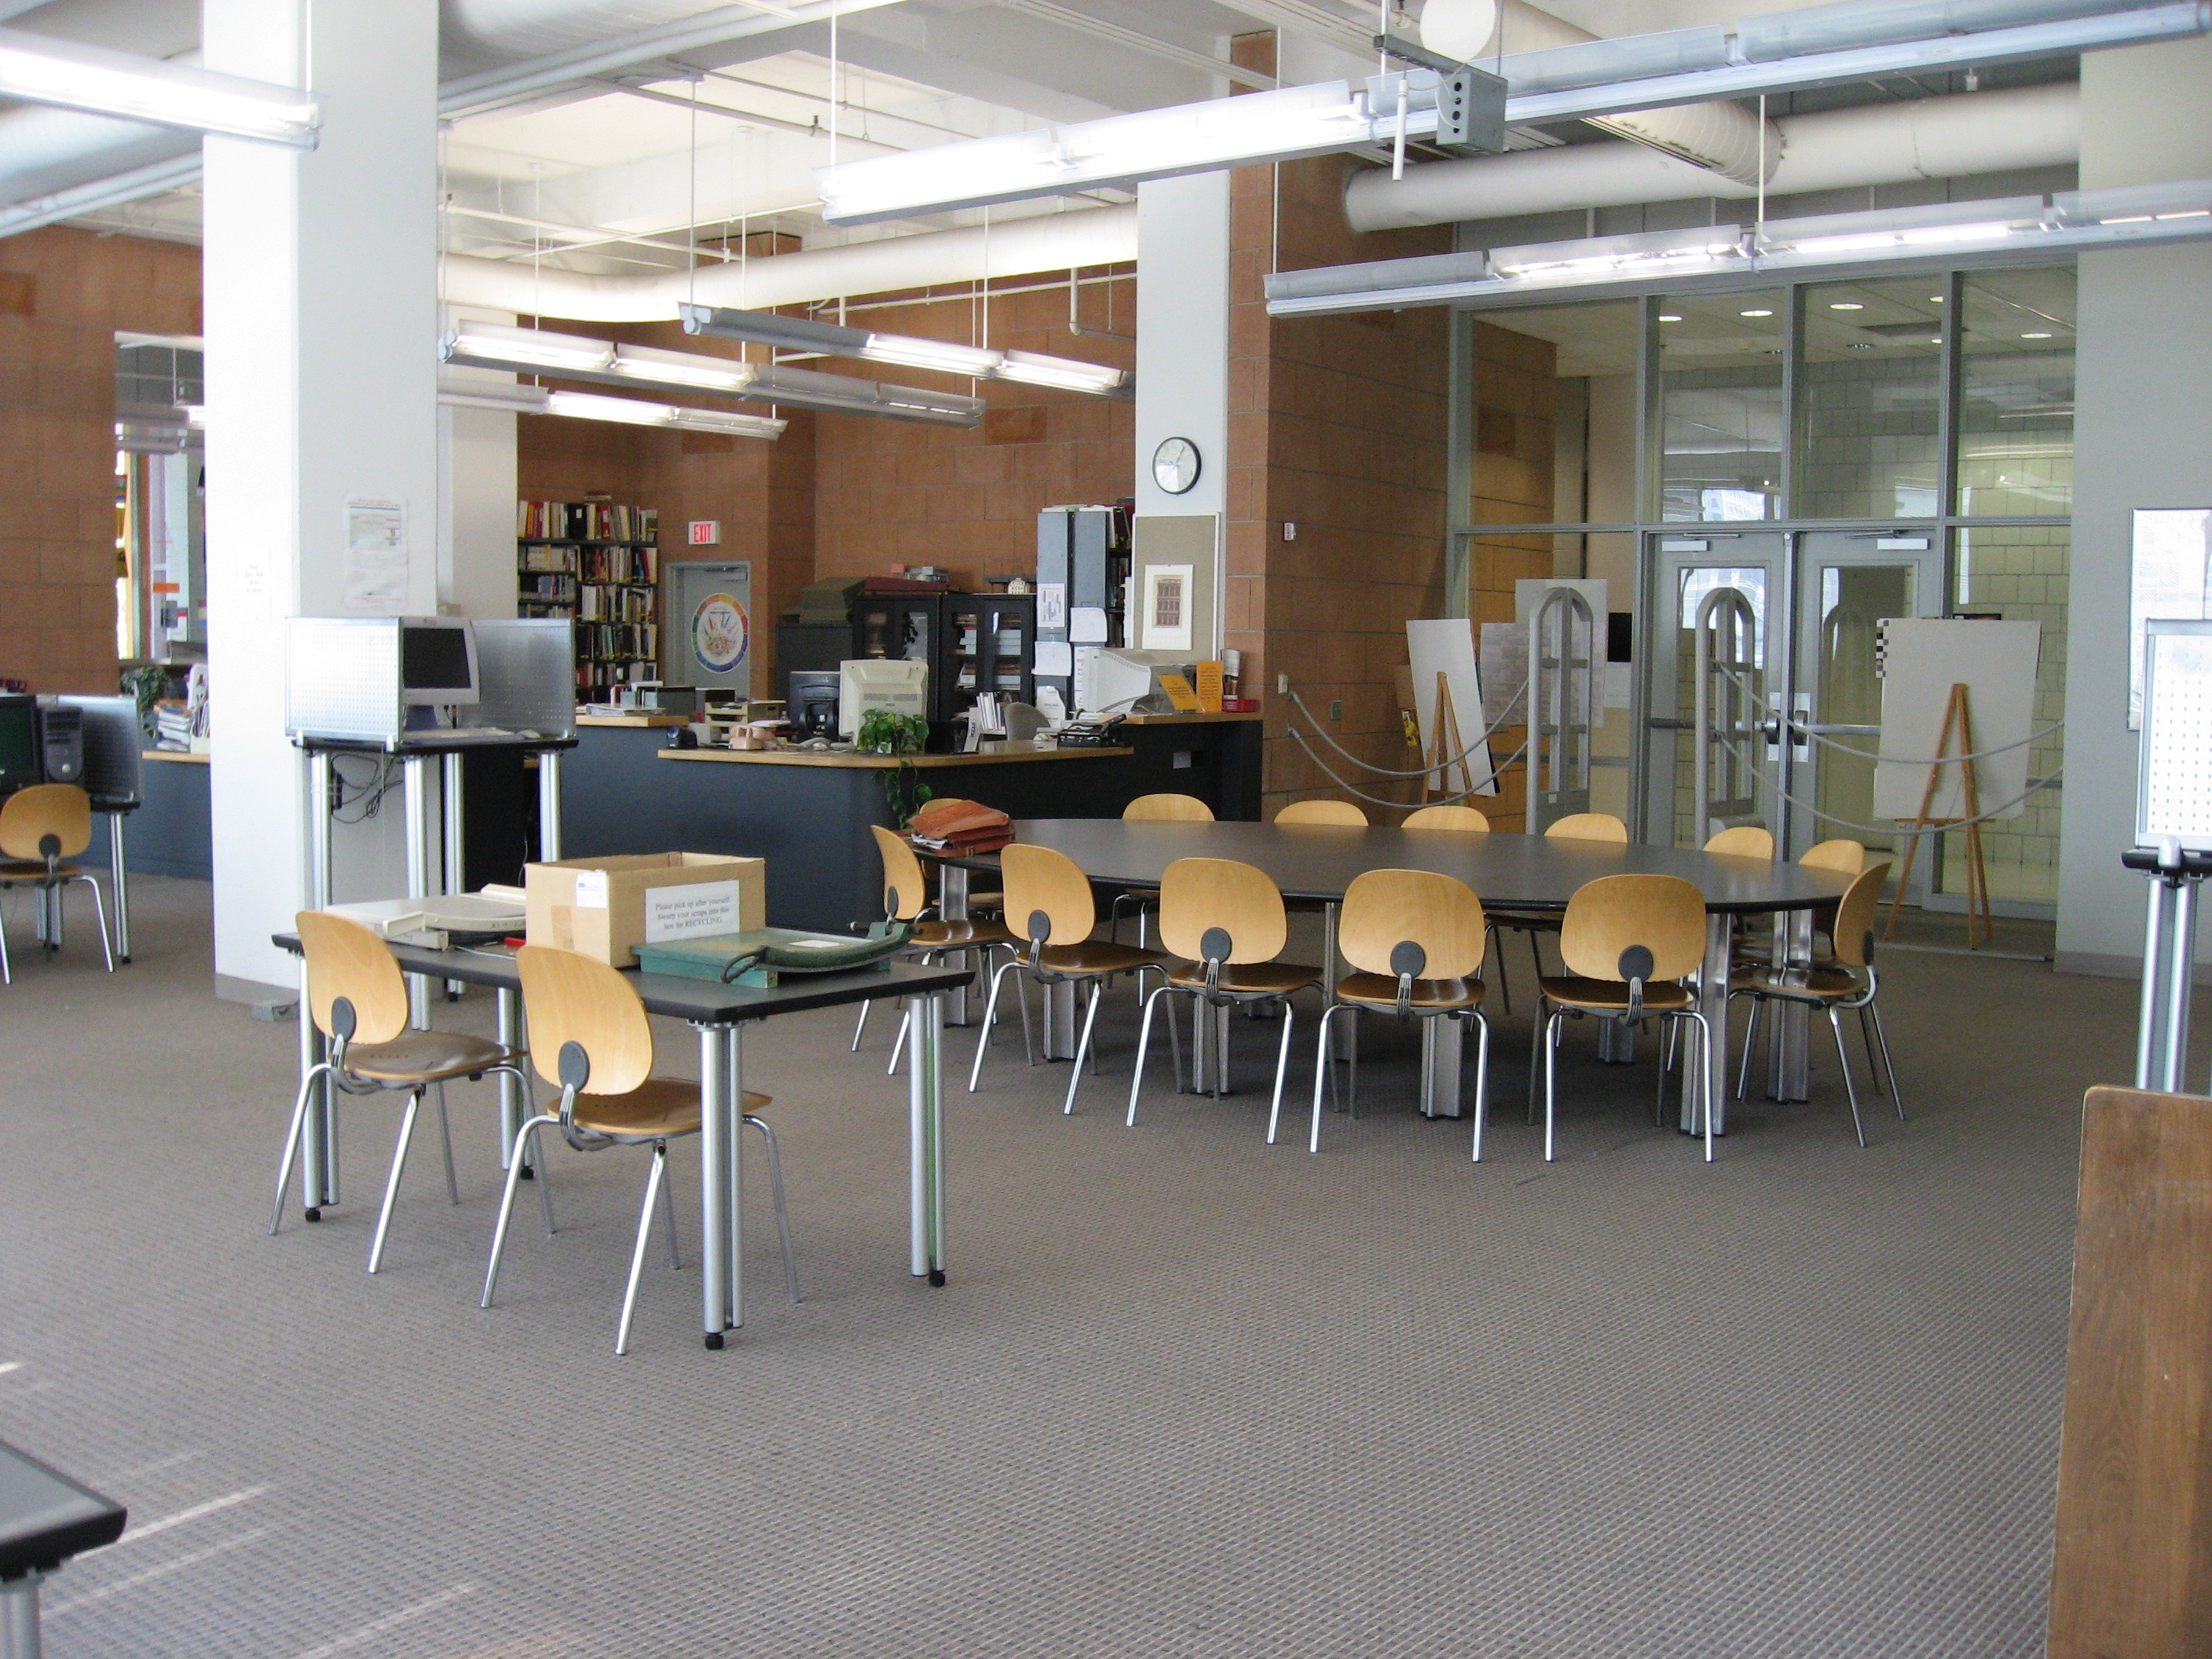 circulation desk and seating area